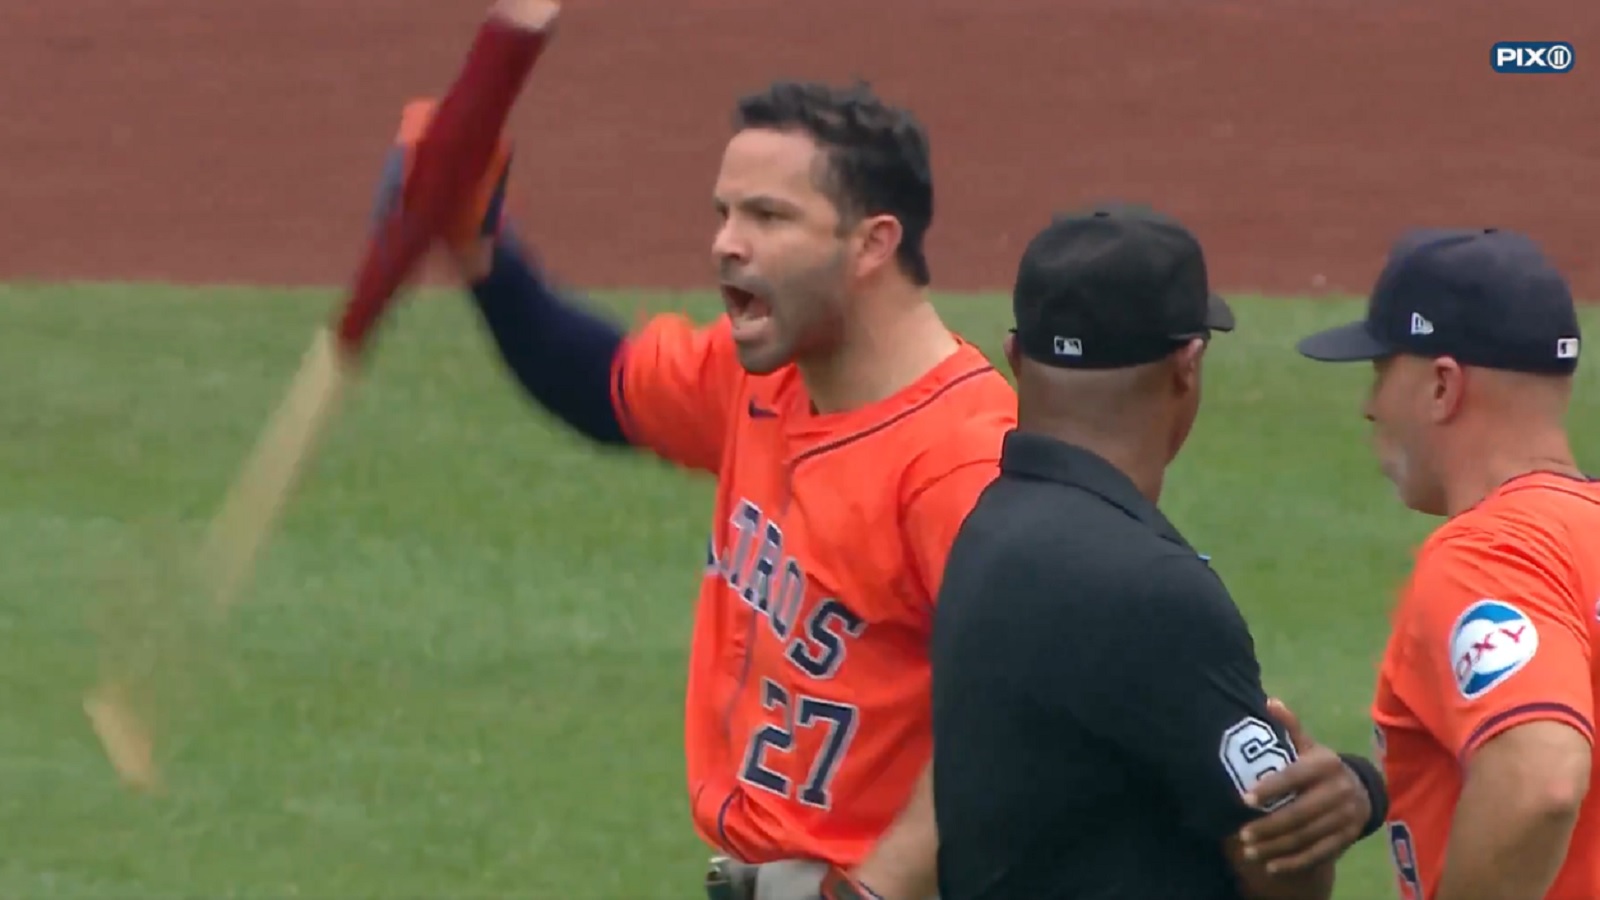 Jose Altuve Ejected After Umpire Missed Call Against Mets